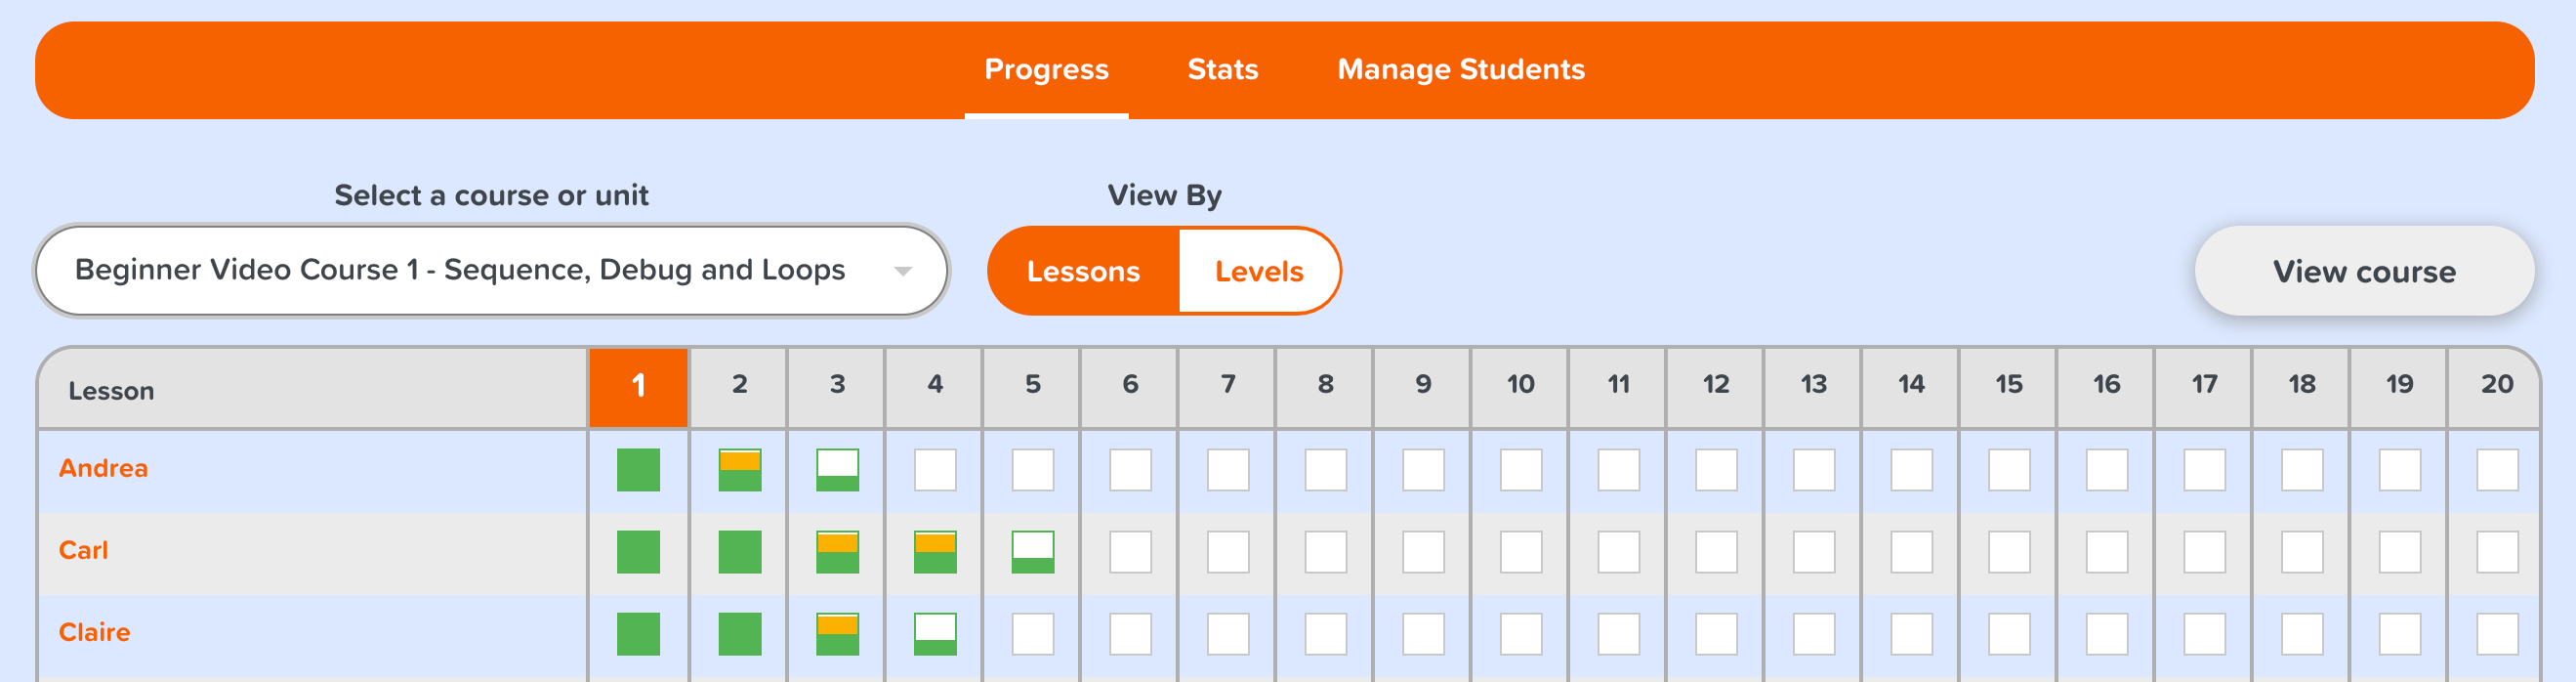 Student progress view by lessons